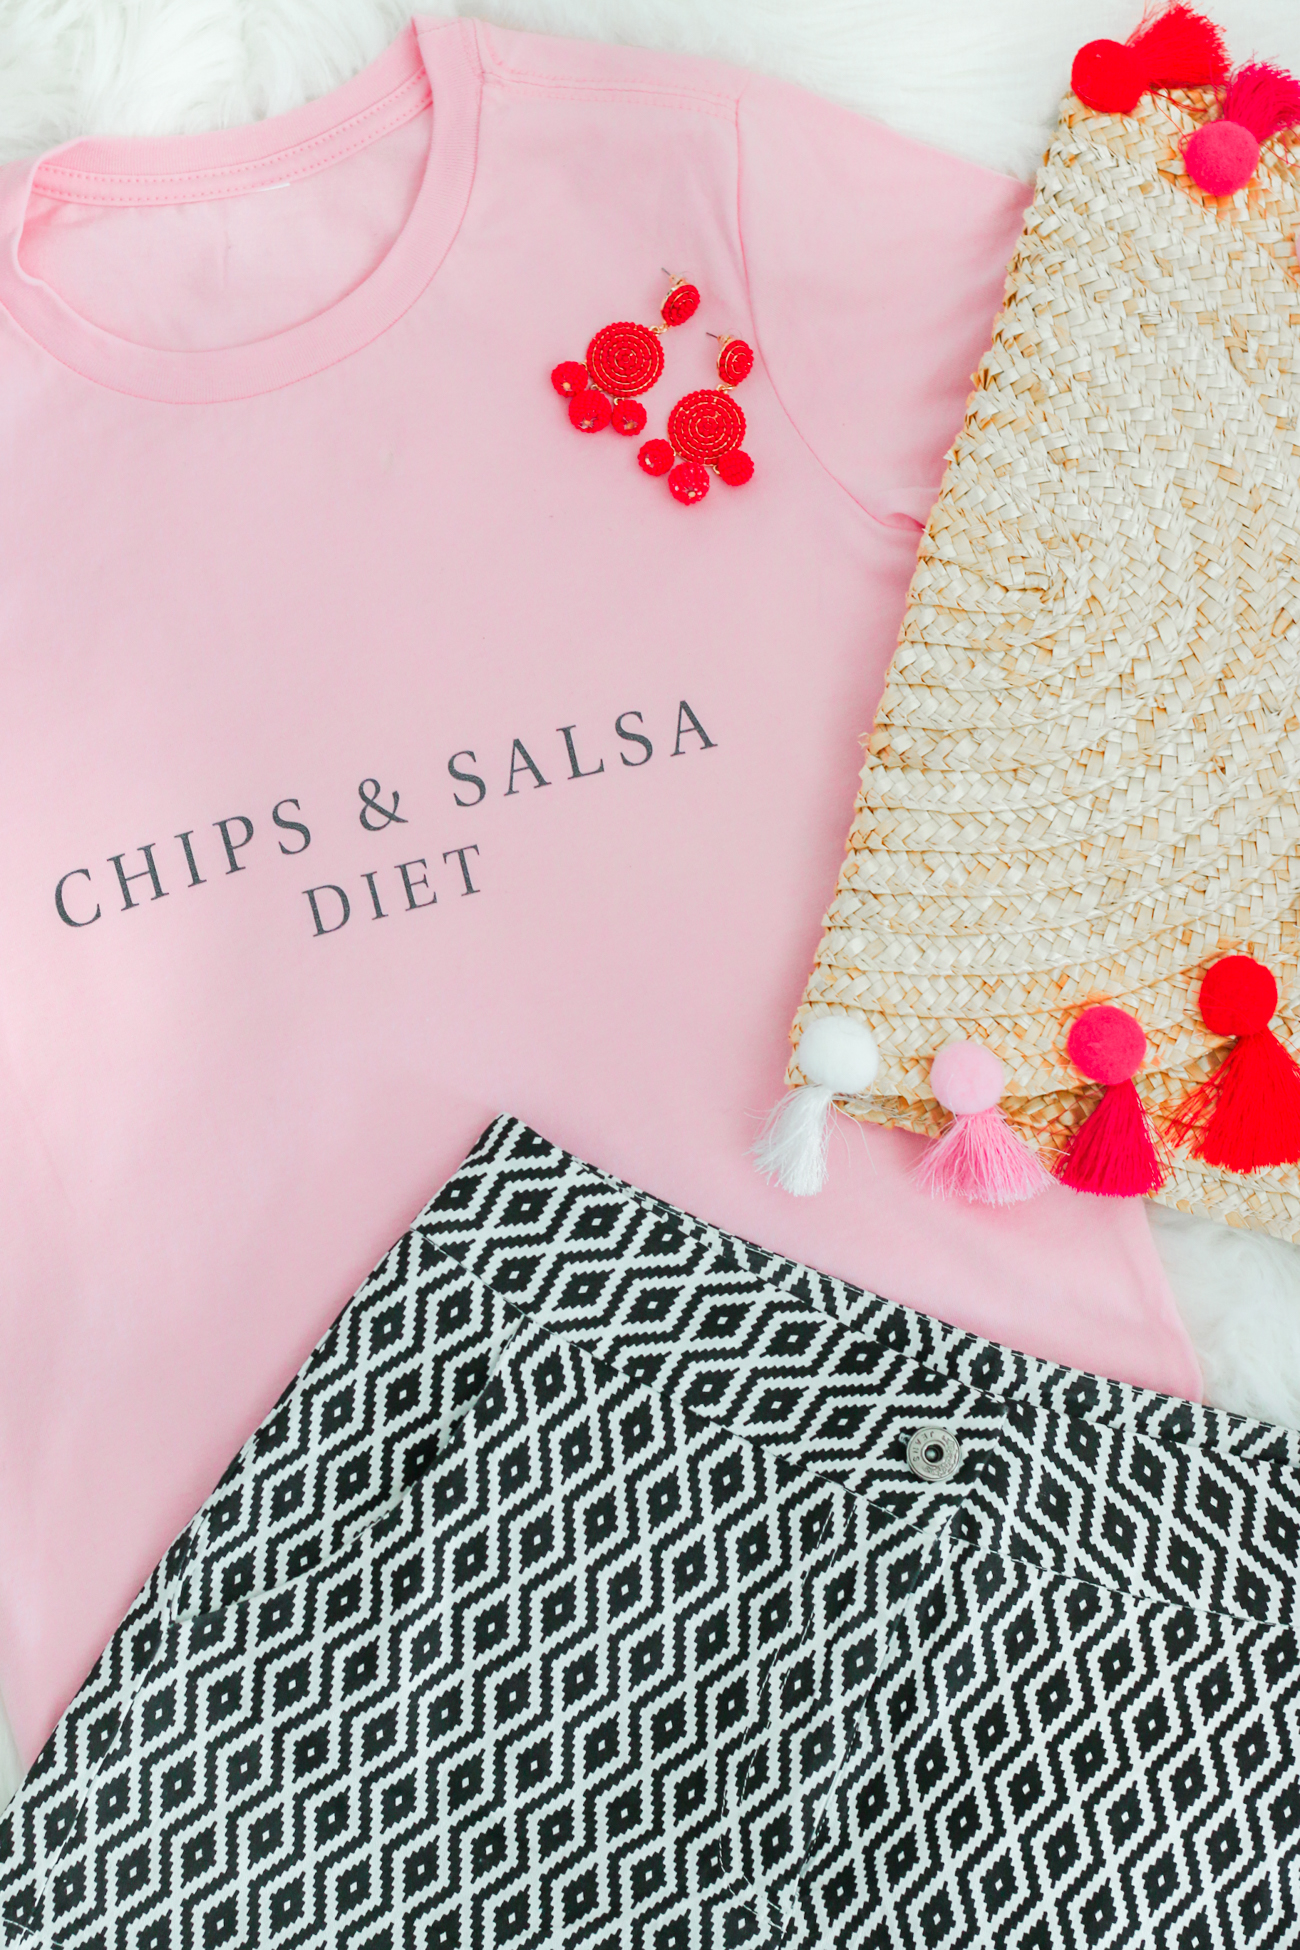 Two Quick Fresh Salsa Recipes for Your Cinco de Mayo Fiesta by southern lifestyle blogger Stephanie Ziajka from Diary of a Debutante, Chips and Salsa Diet shirt, casual Cinco de Mayo outfit idea, strawberry jalapeno salsa recipe, strawberry and jalapeno salsa recipe, homemade salsa recipe